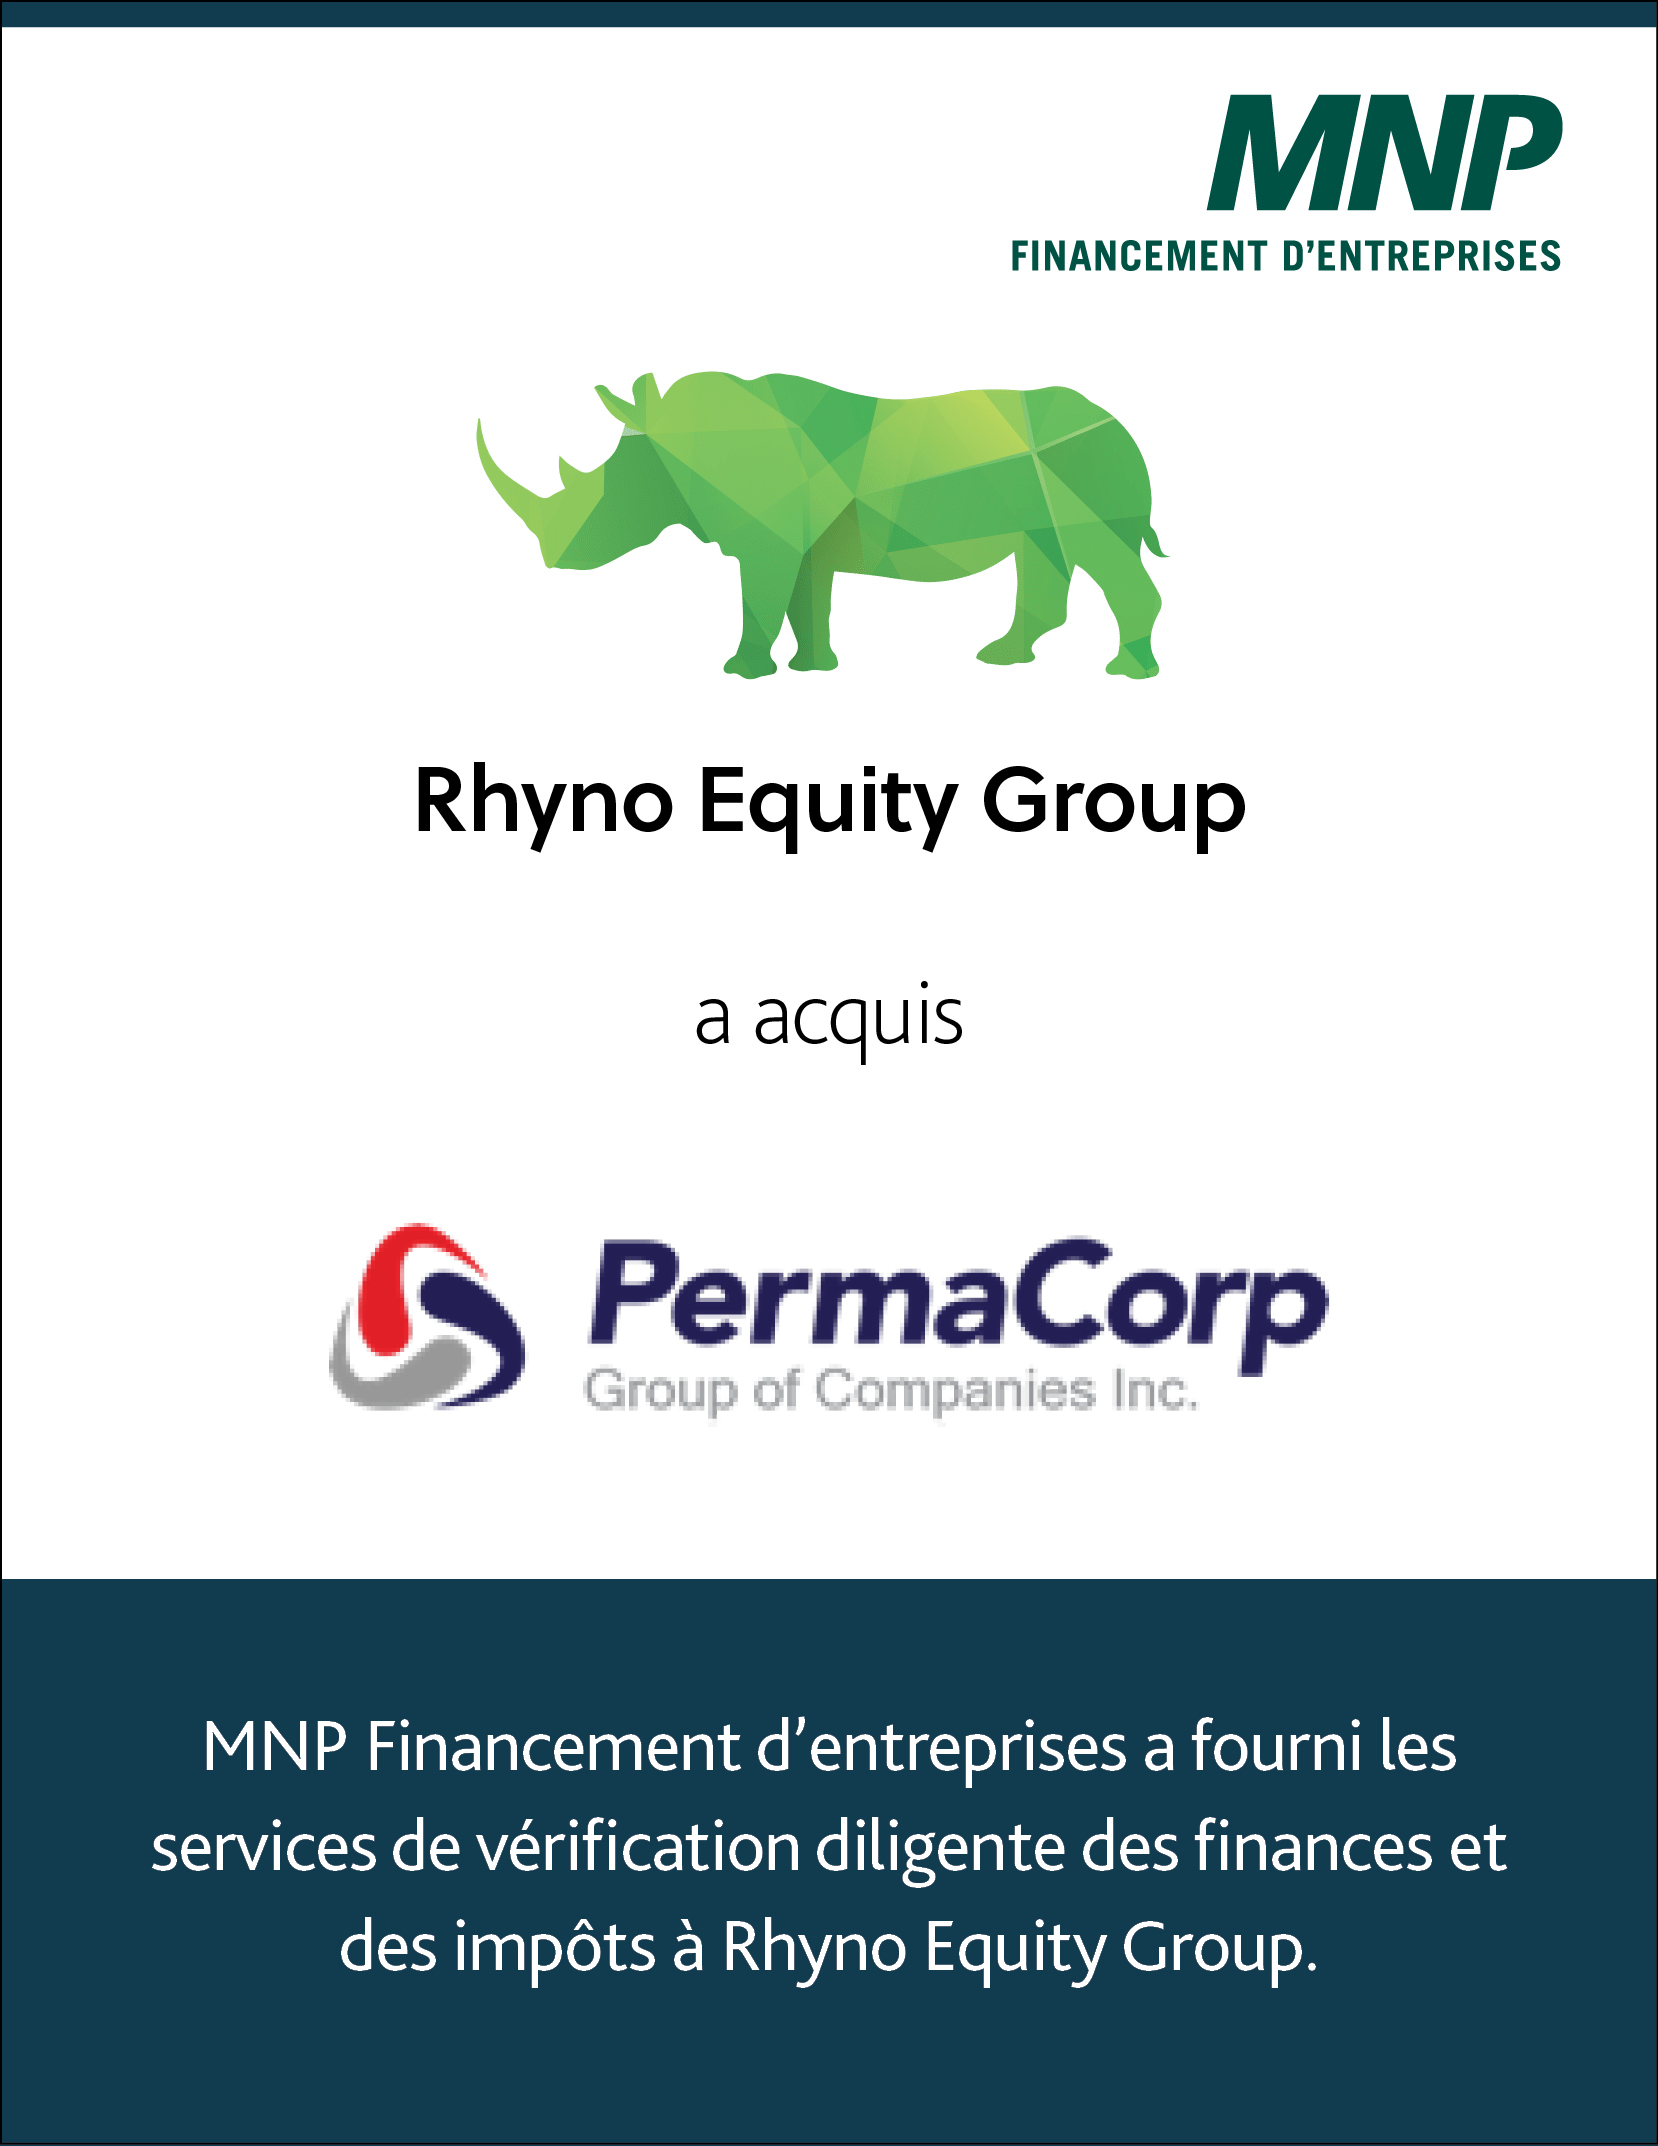 Rhyno Equity Group a acquis Permacorp Group of Companies